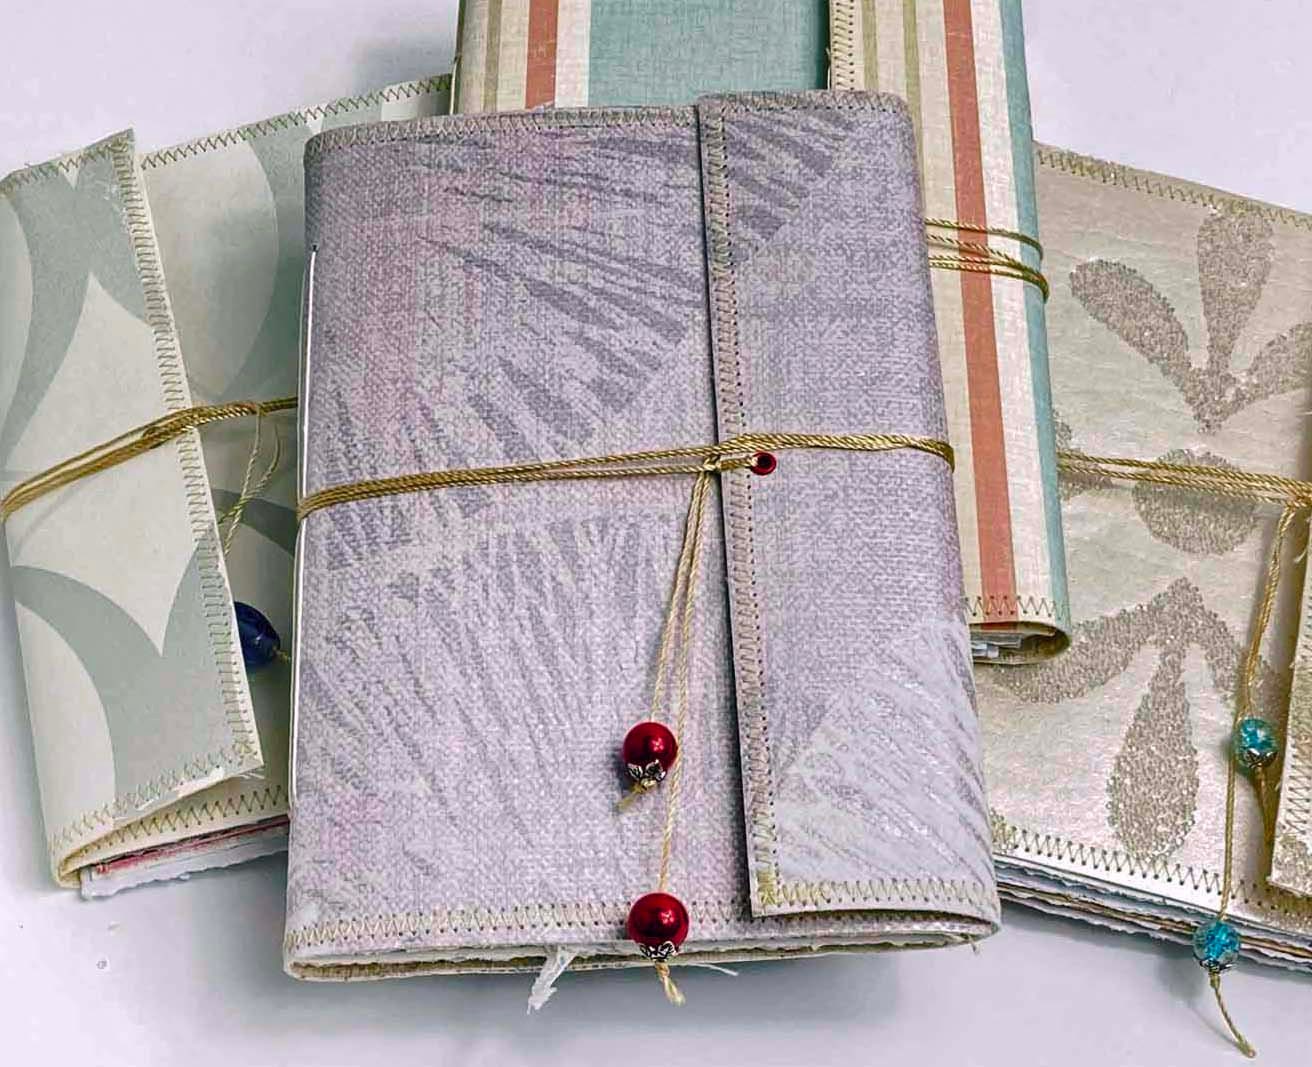 Blank Writing Journal, Junk Journal for Beginner, Scrapbook, Blank  Newsprint Pages, Wallpaper Cover, Fits in your Purse